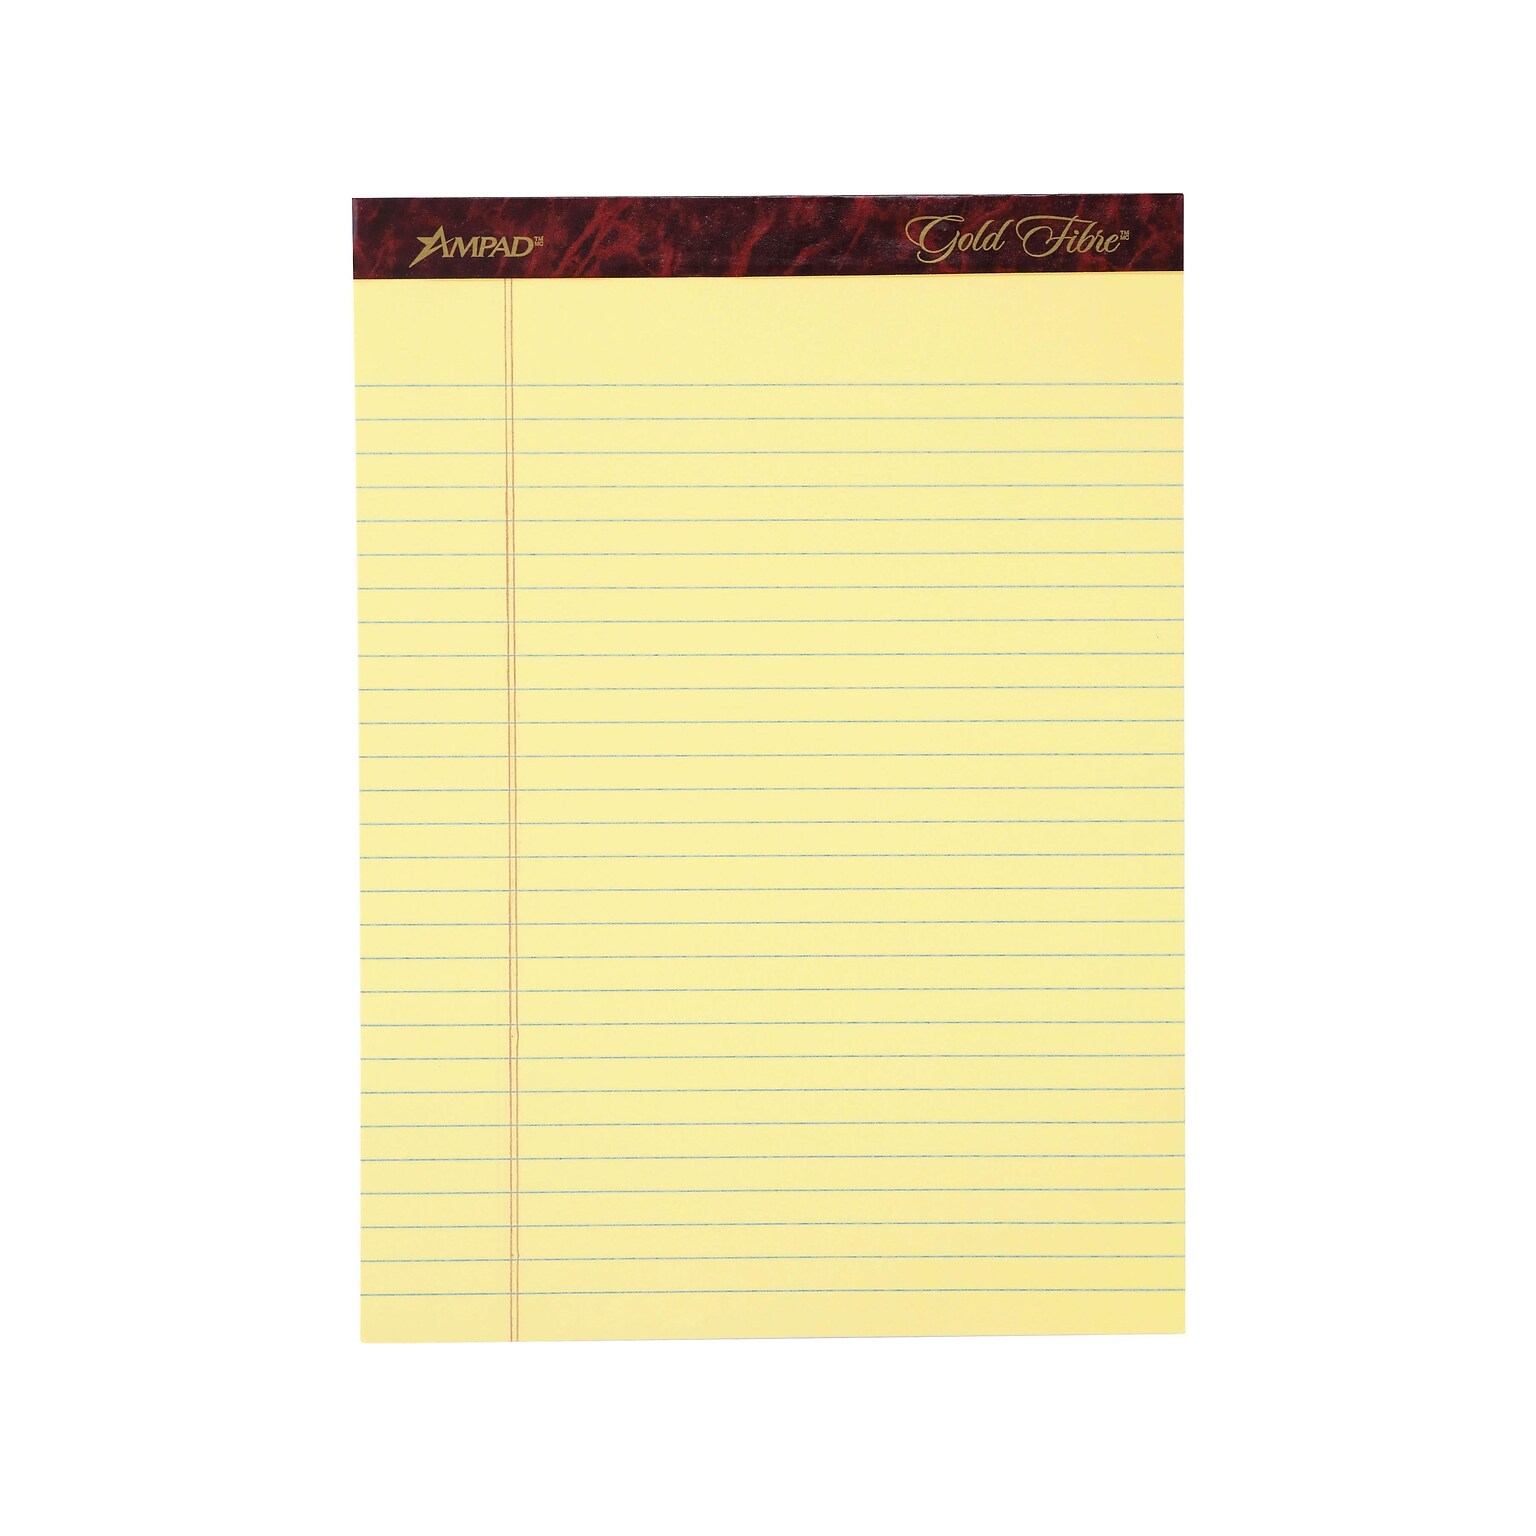 Ampad Gold Fibre Notepads, 8.5 x 11.75, Legal Rule, Canary, 50 Sheets/Pad, 12 Pads/Pack (TOP 20-020R)